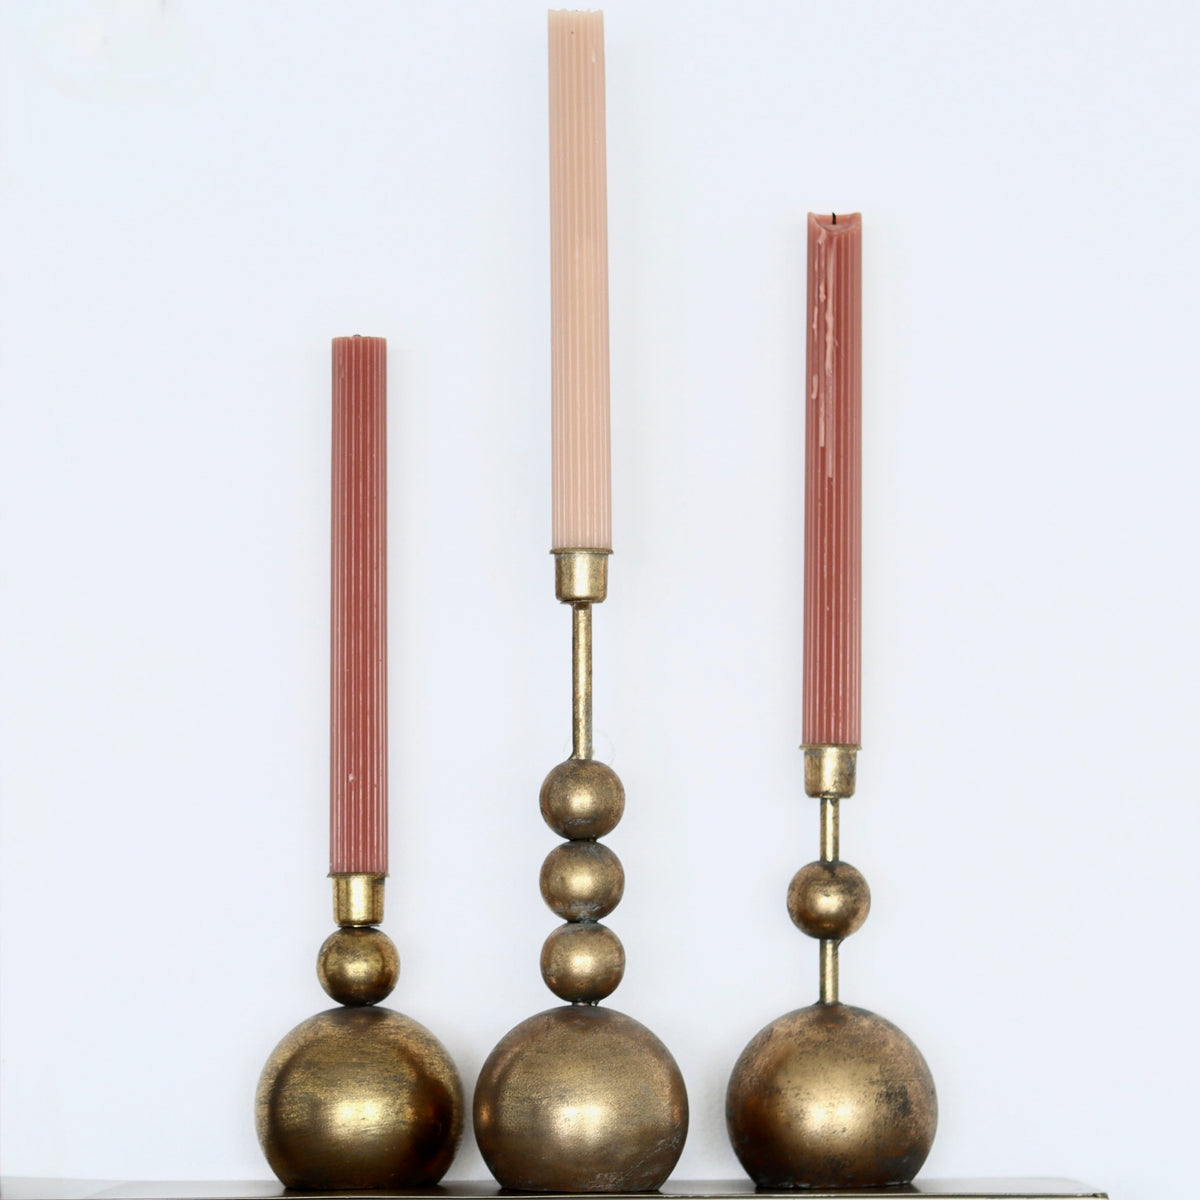 Stacked Metal Orb Antiqued Brass Finish Taper Candle Holders - Set